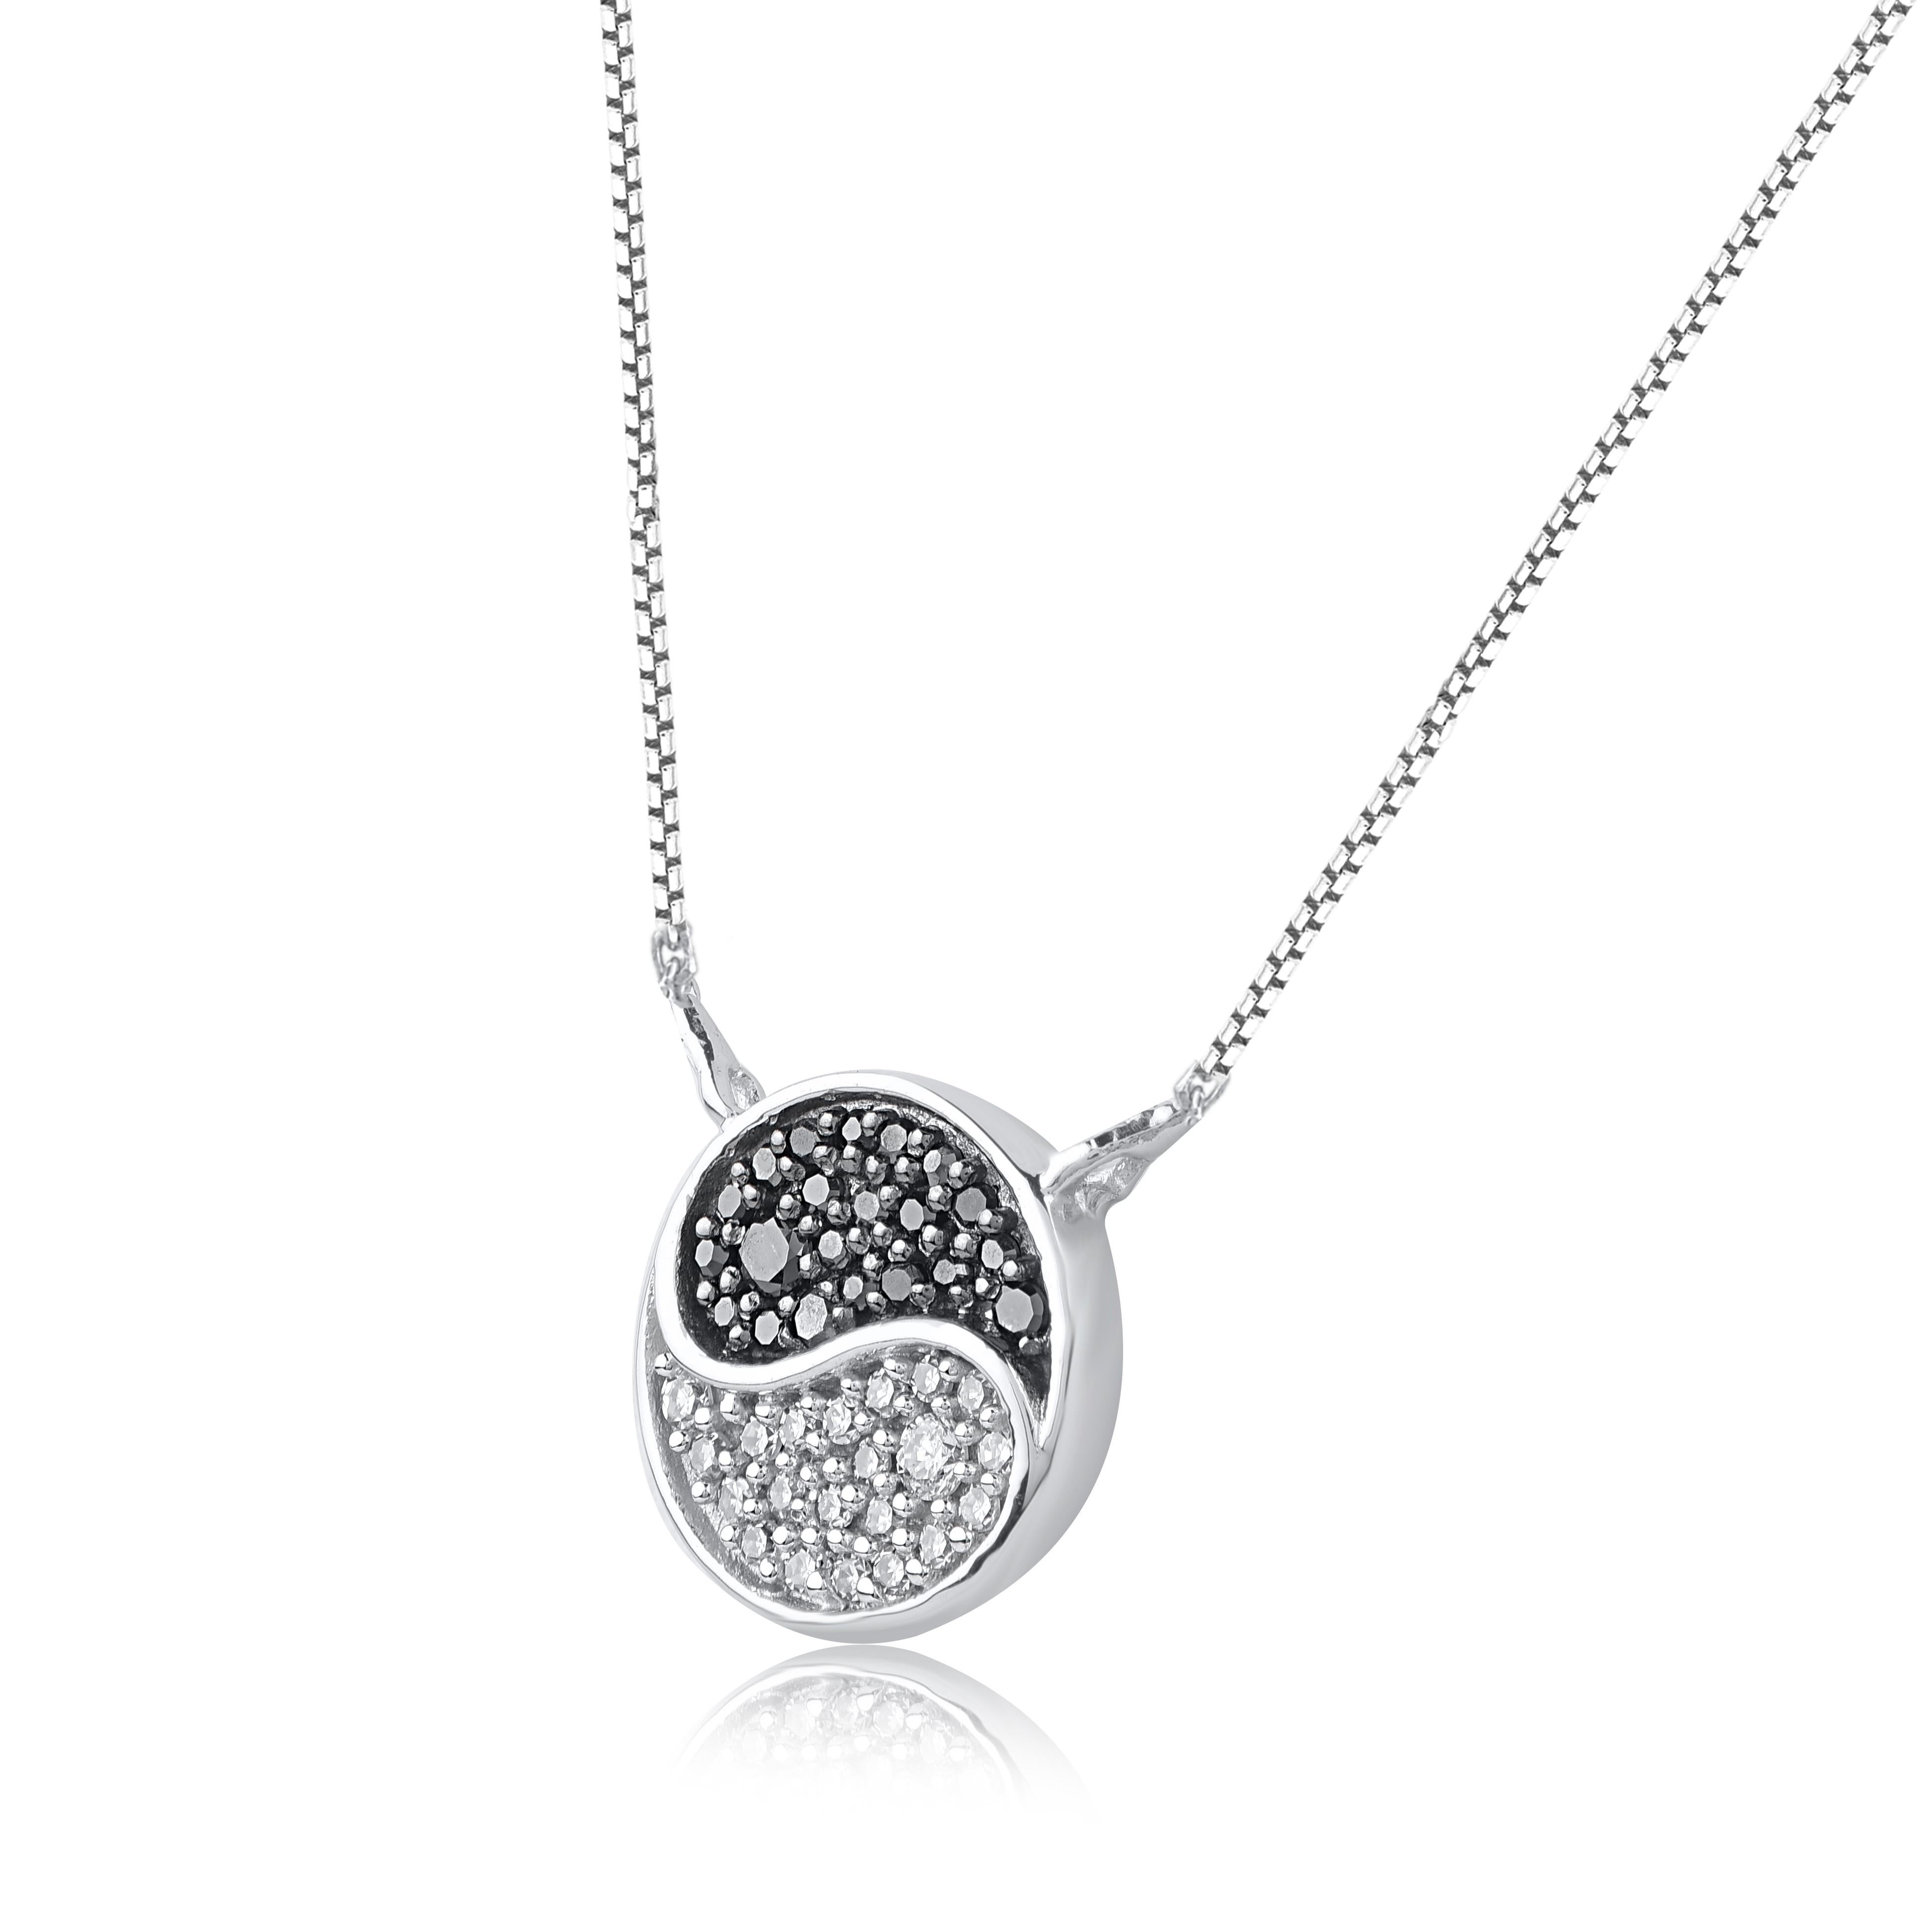 This diamond yin-yang pendant fits any occasion with ease. These pendant is studded with 42 single cut, brilliant cut & black treated diamonds in pave setting and crafted in 14 karat white gold. Diamonds are graded as H-I color and I-2 clarity.